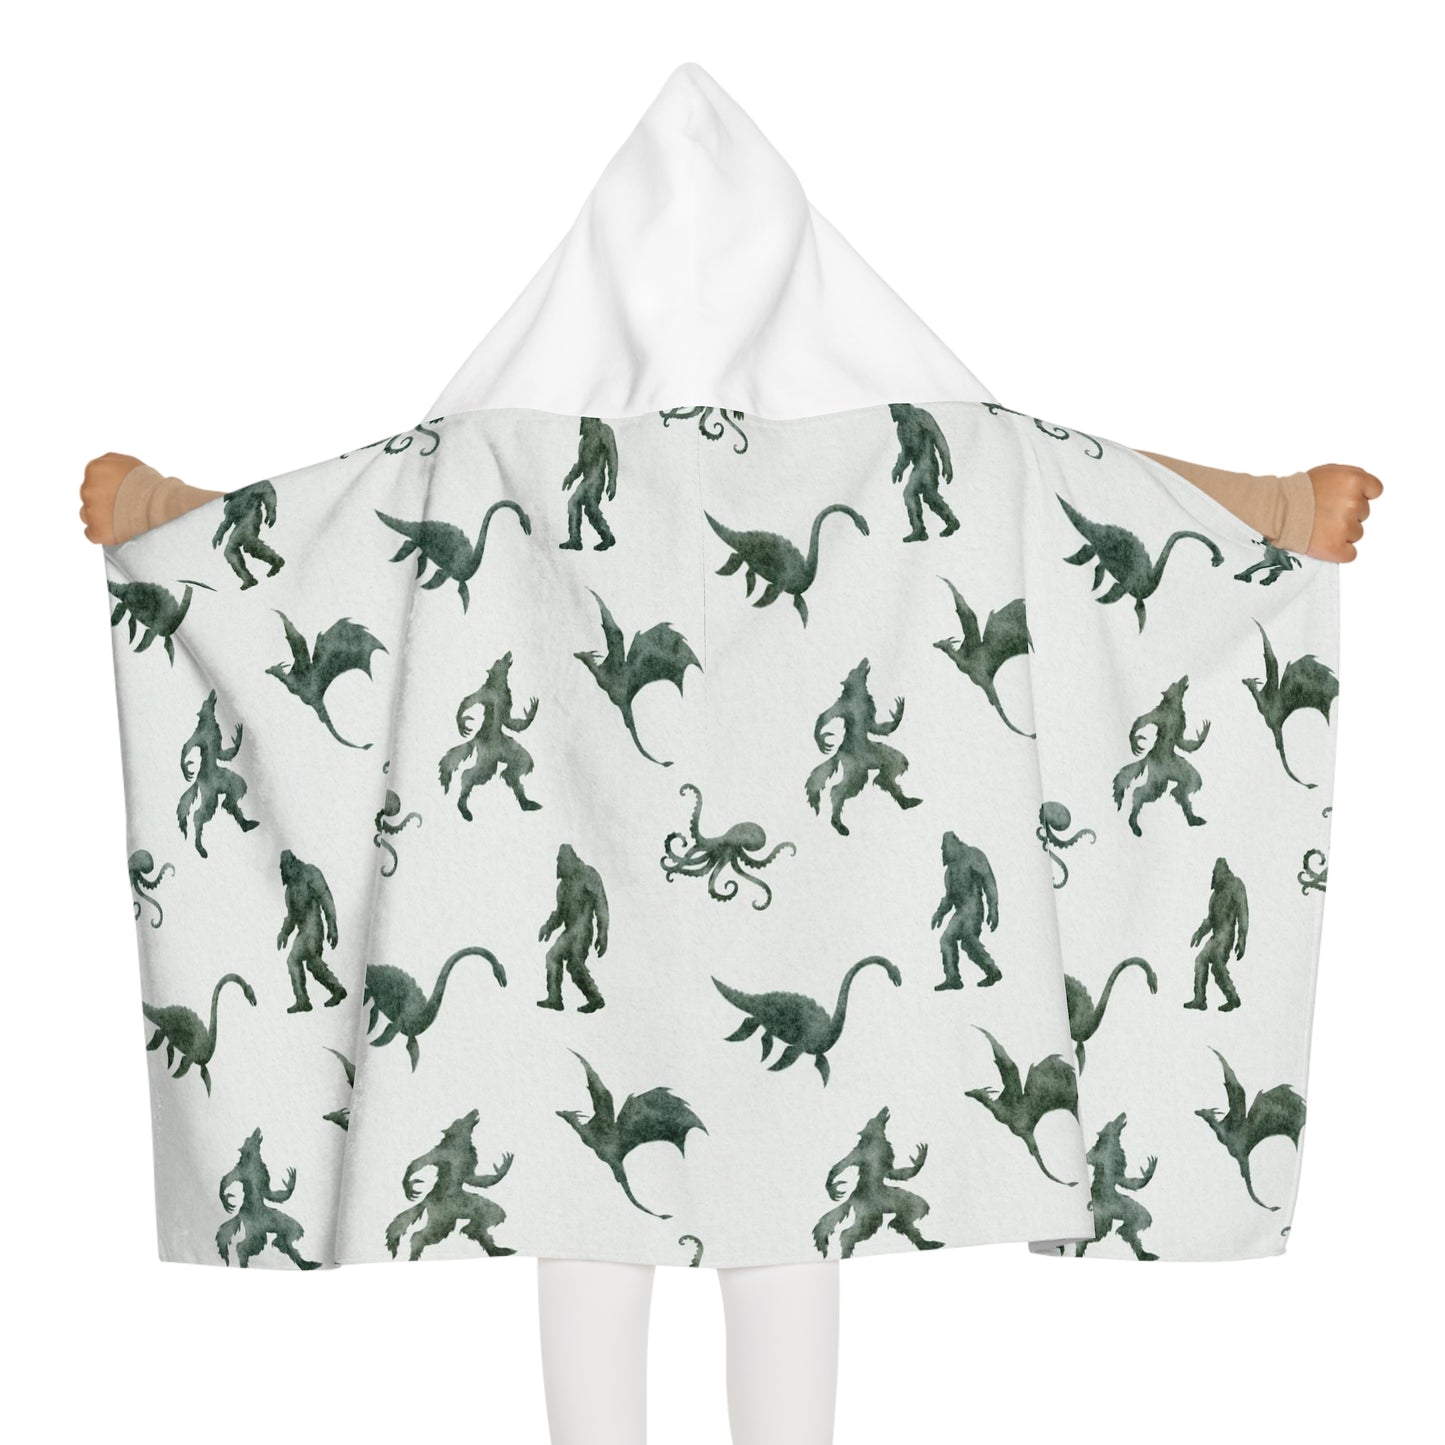 Mythical Creatures Hooded Towel